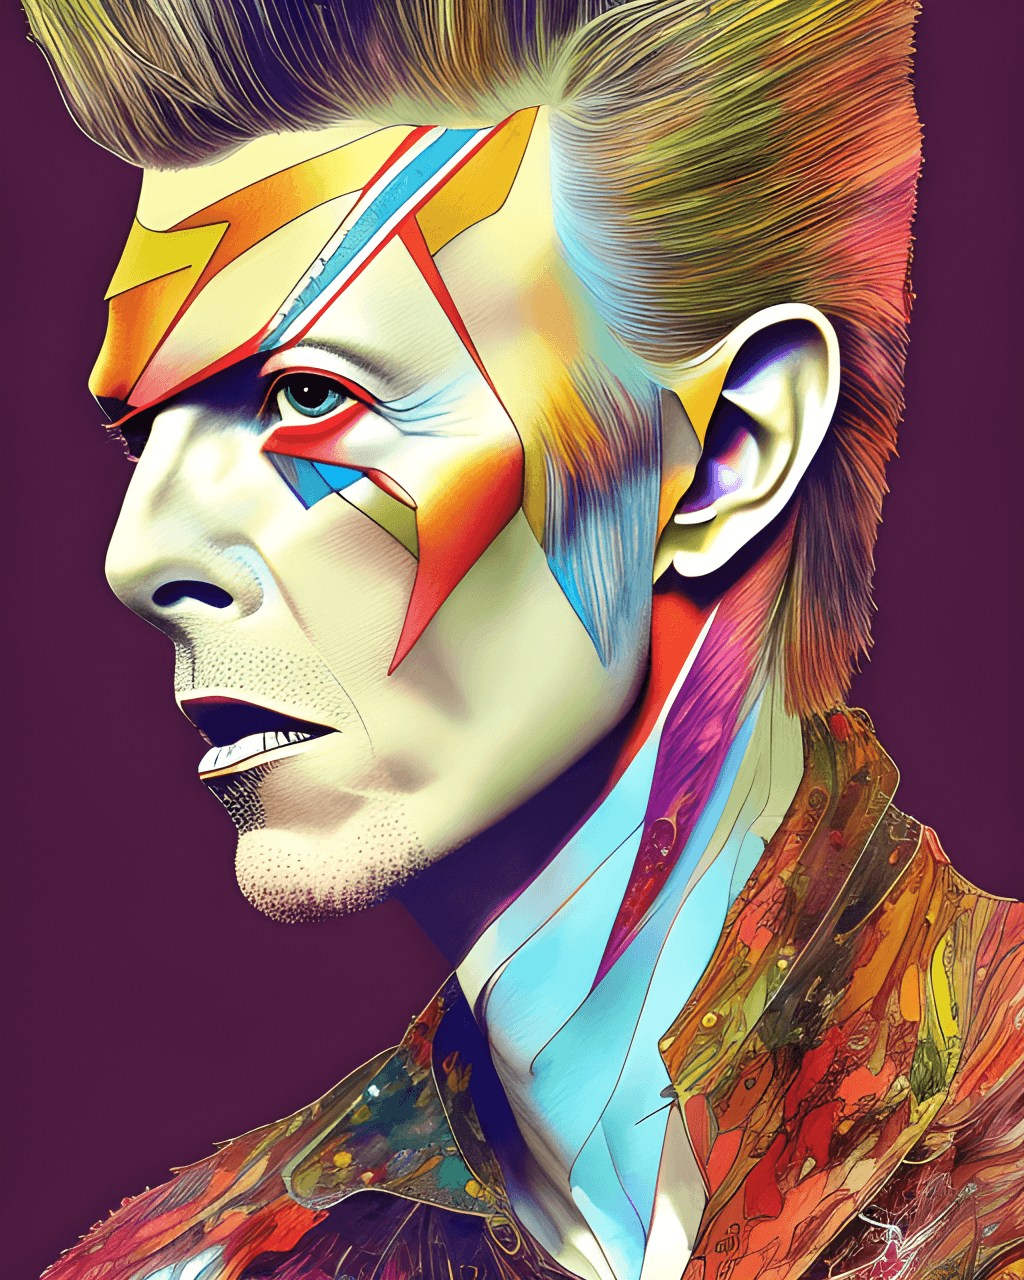 David Bowie Side View Graphic · Creative Fabrica